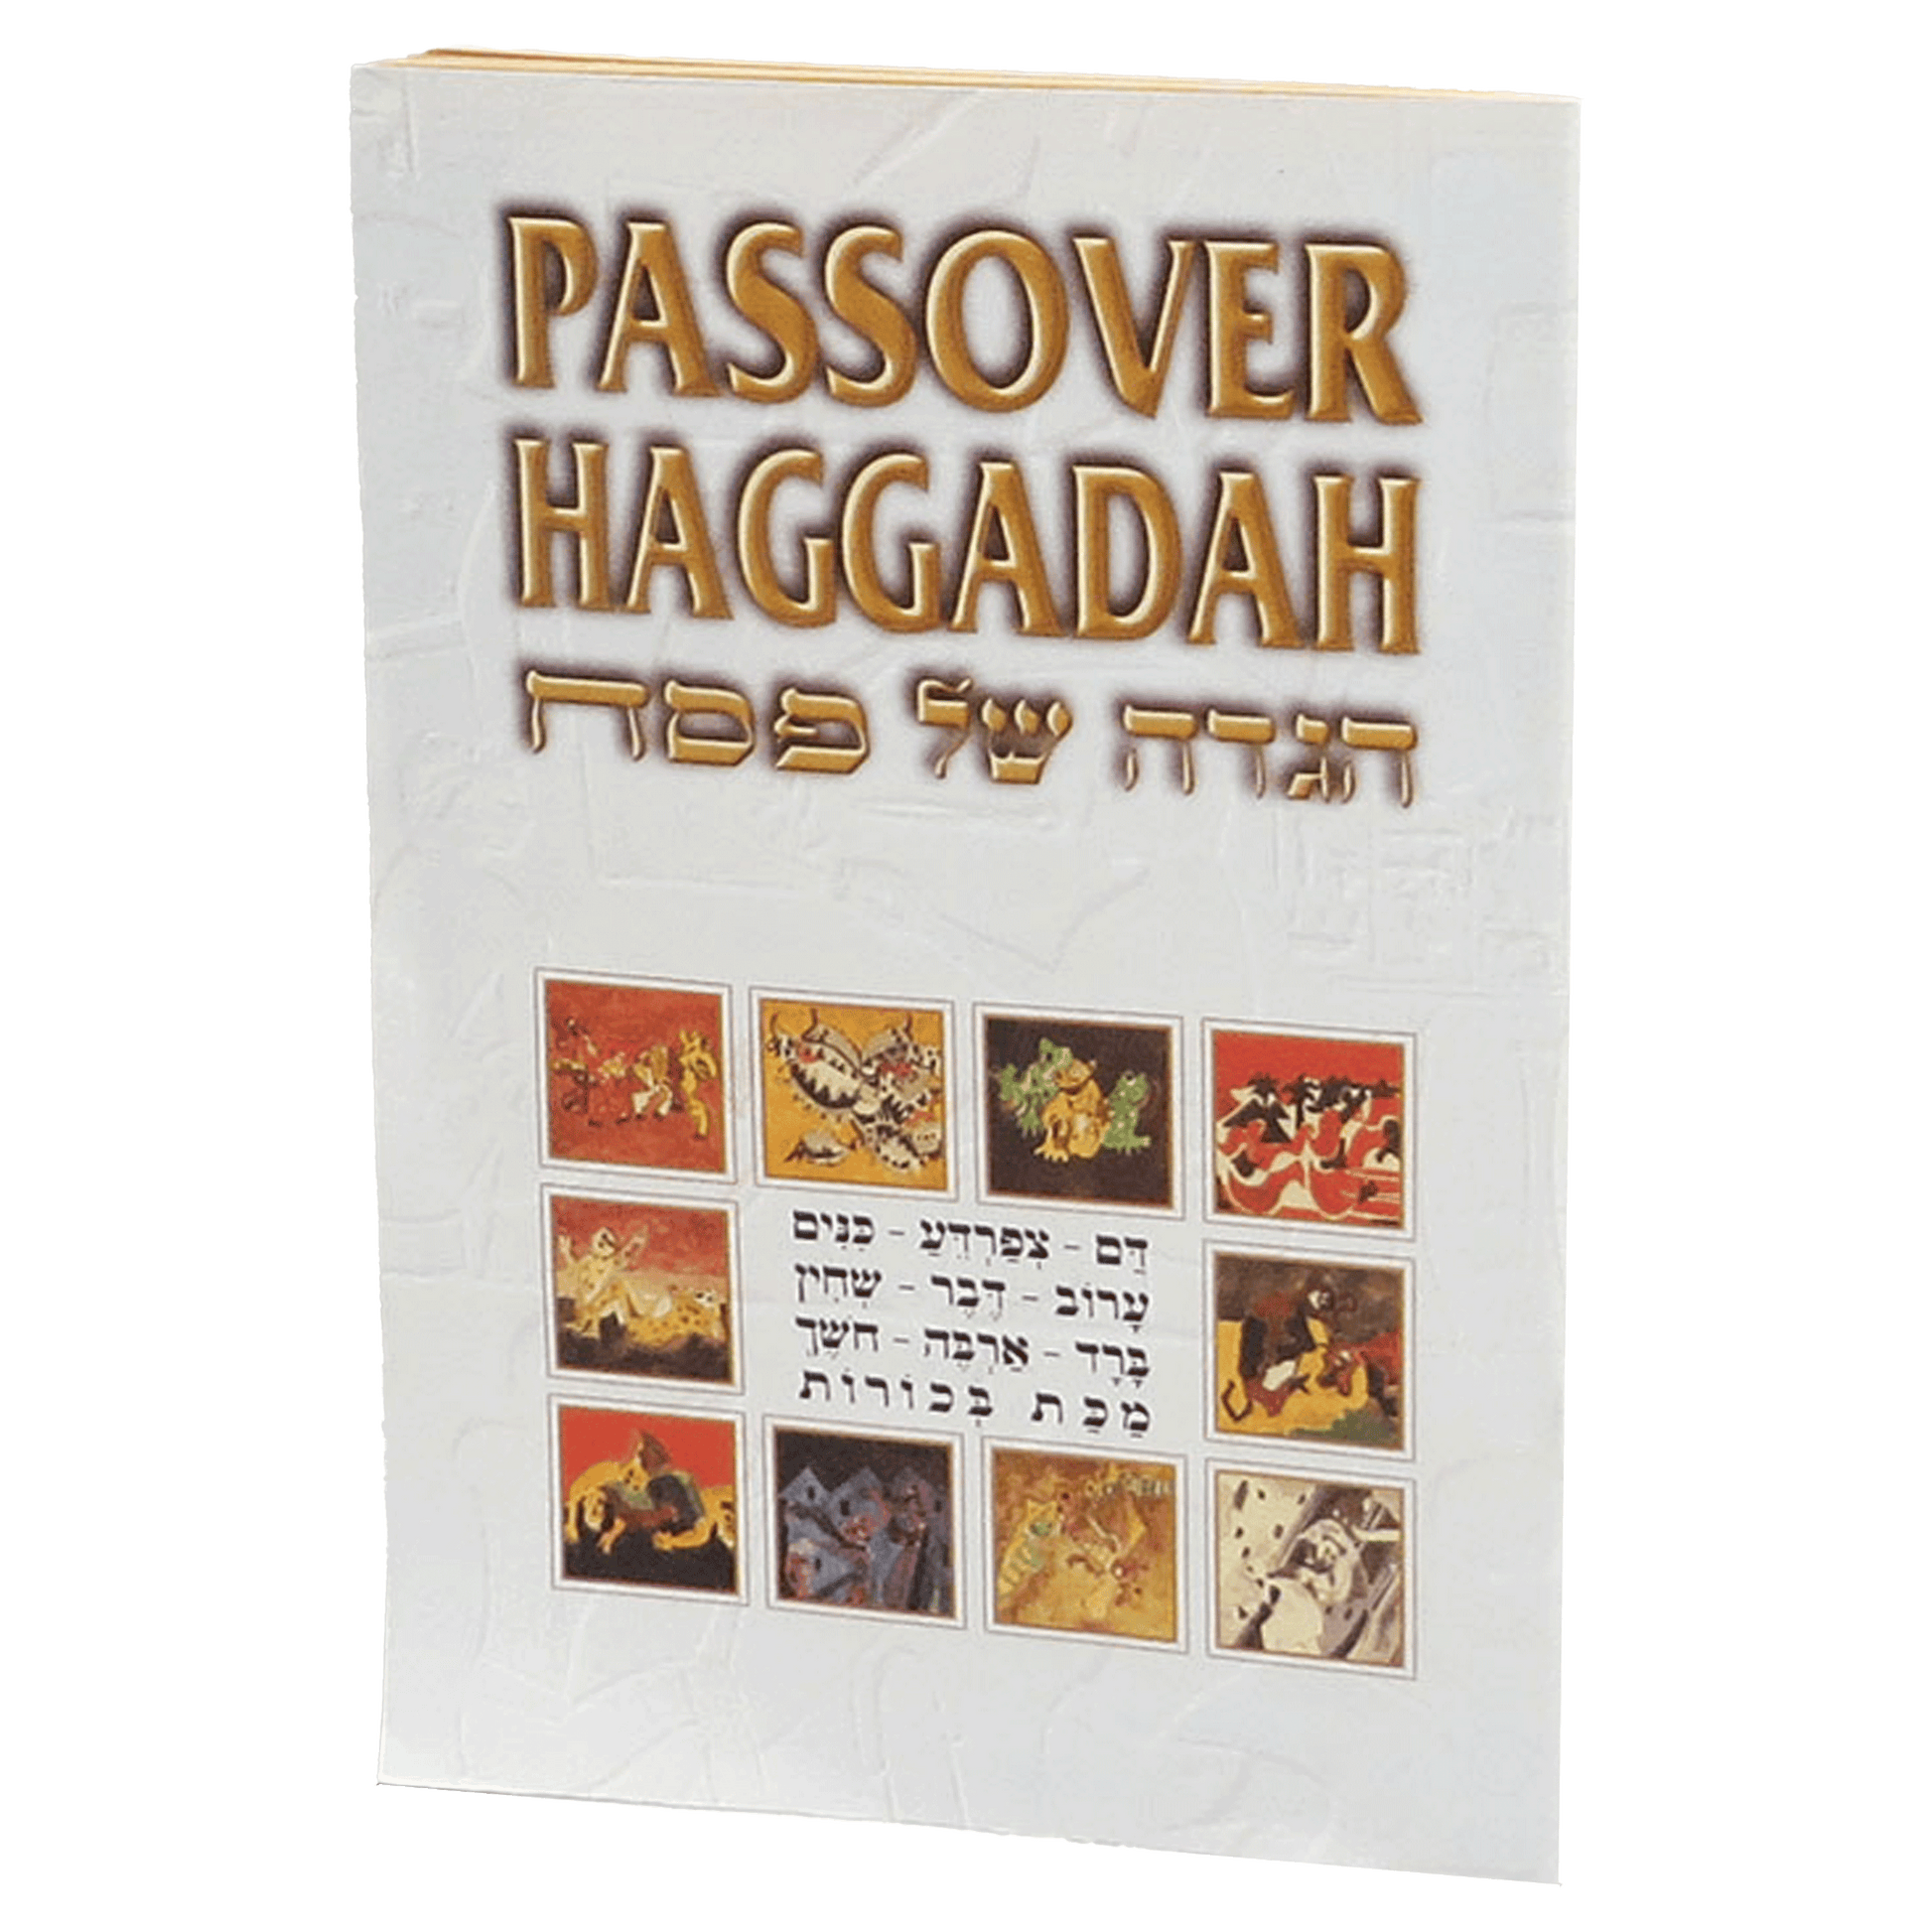 passover Haggadah soft cover book front cover with hebrew writing and ancient images 